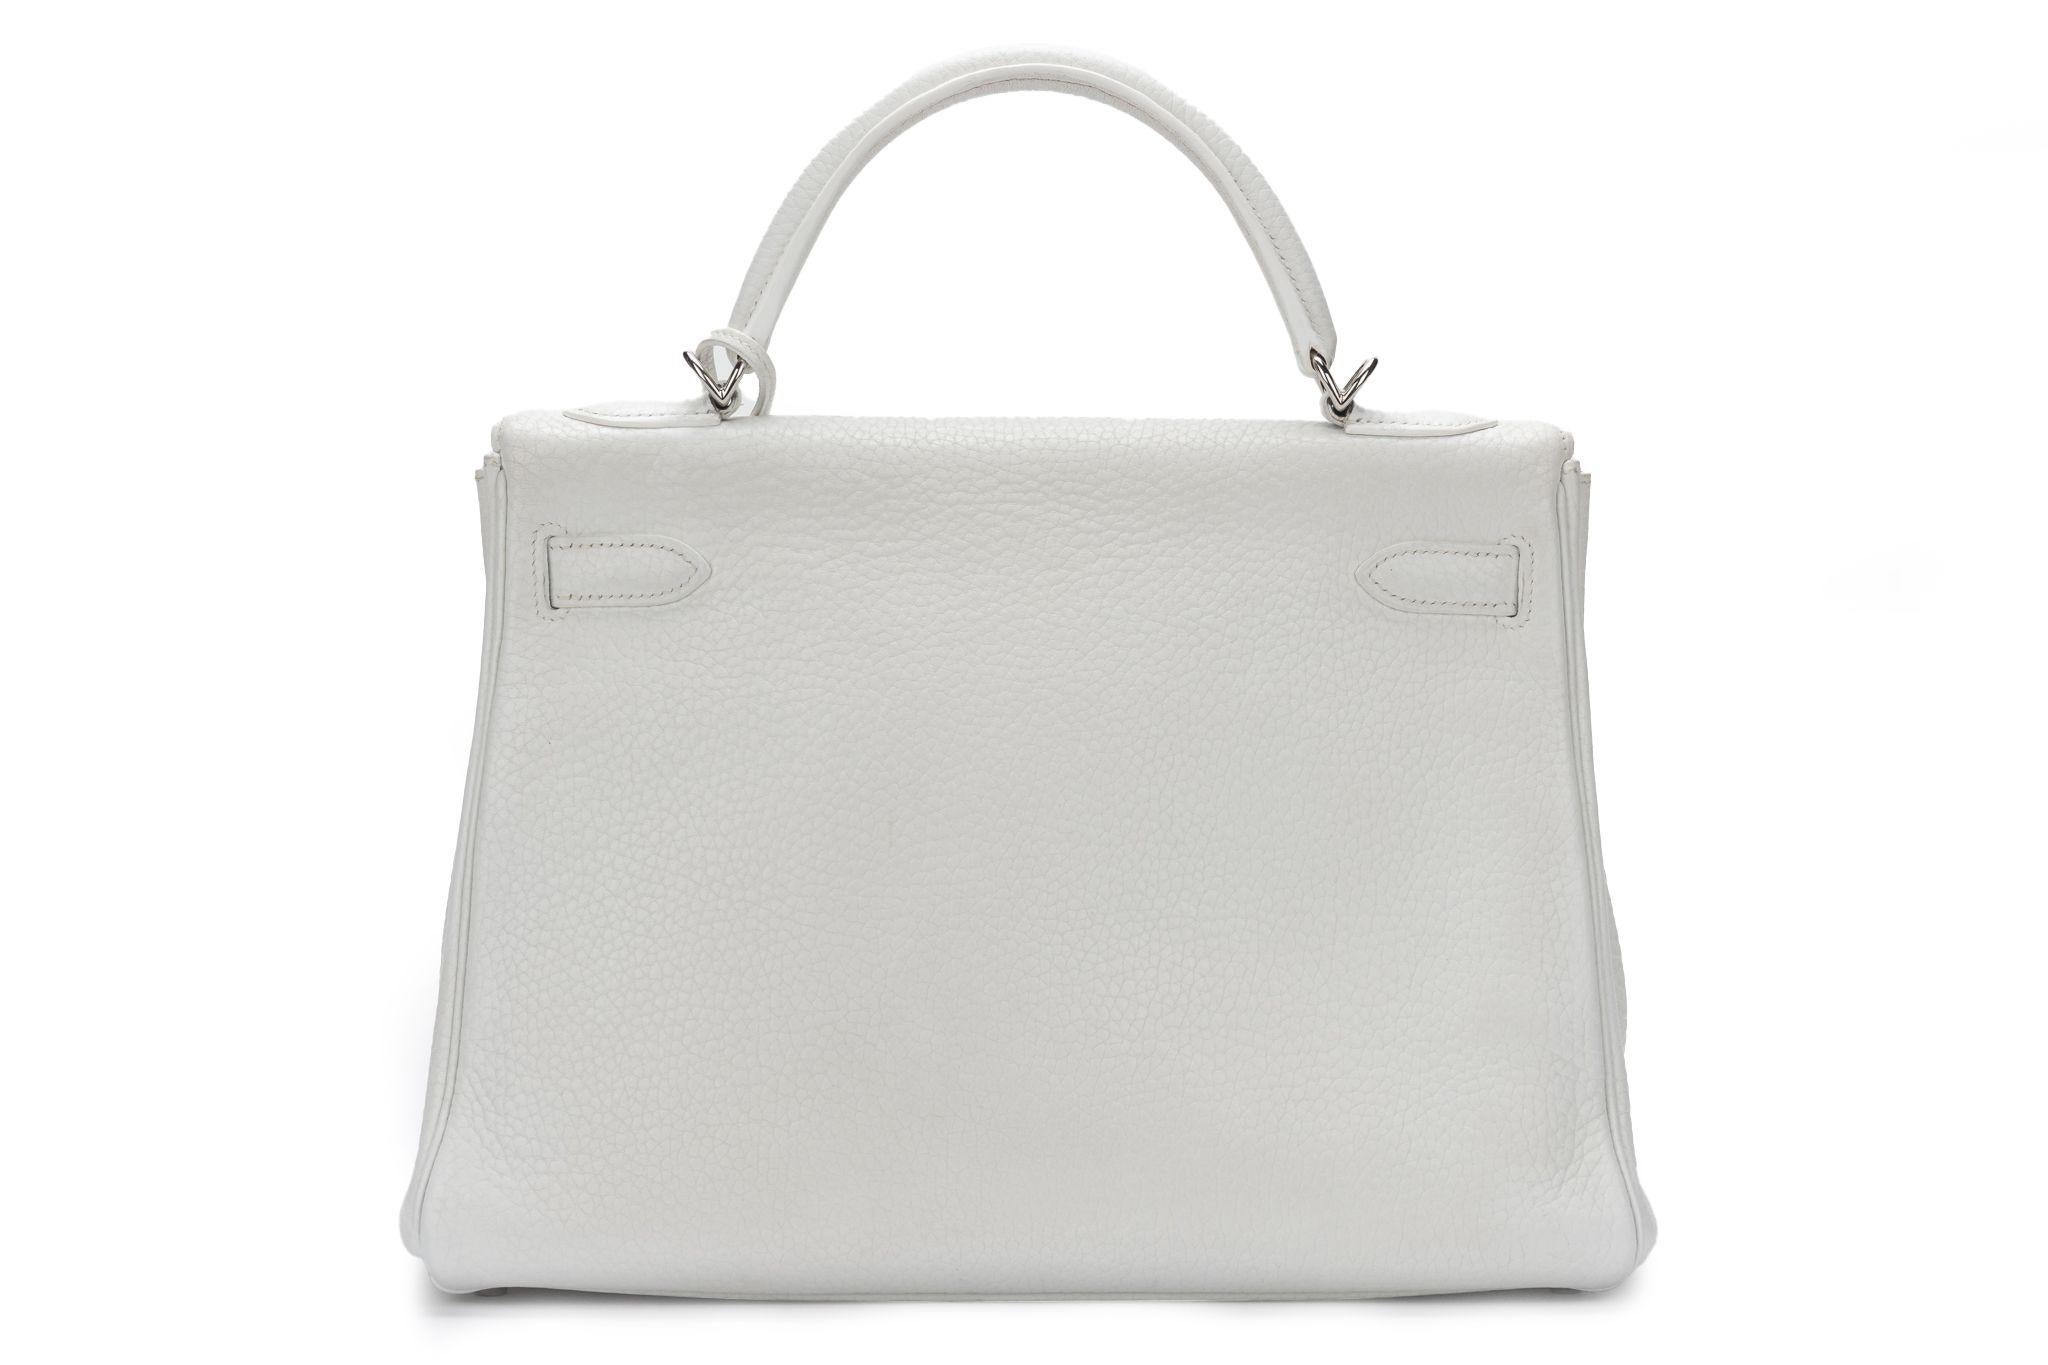 Hermès Kelly 32 Retourne White Clemence In Excellent Condition For Sale In West Hollywood, CA